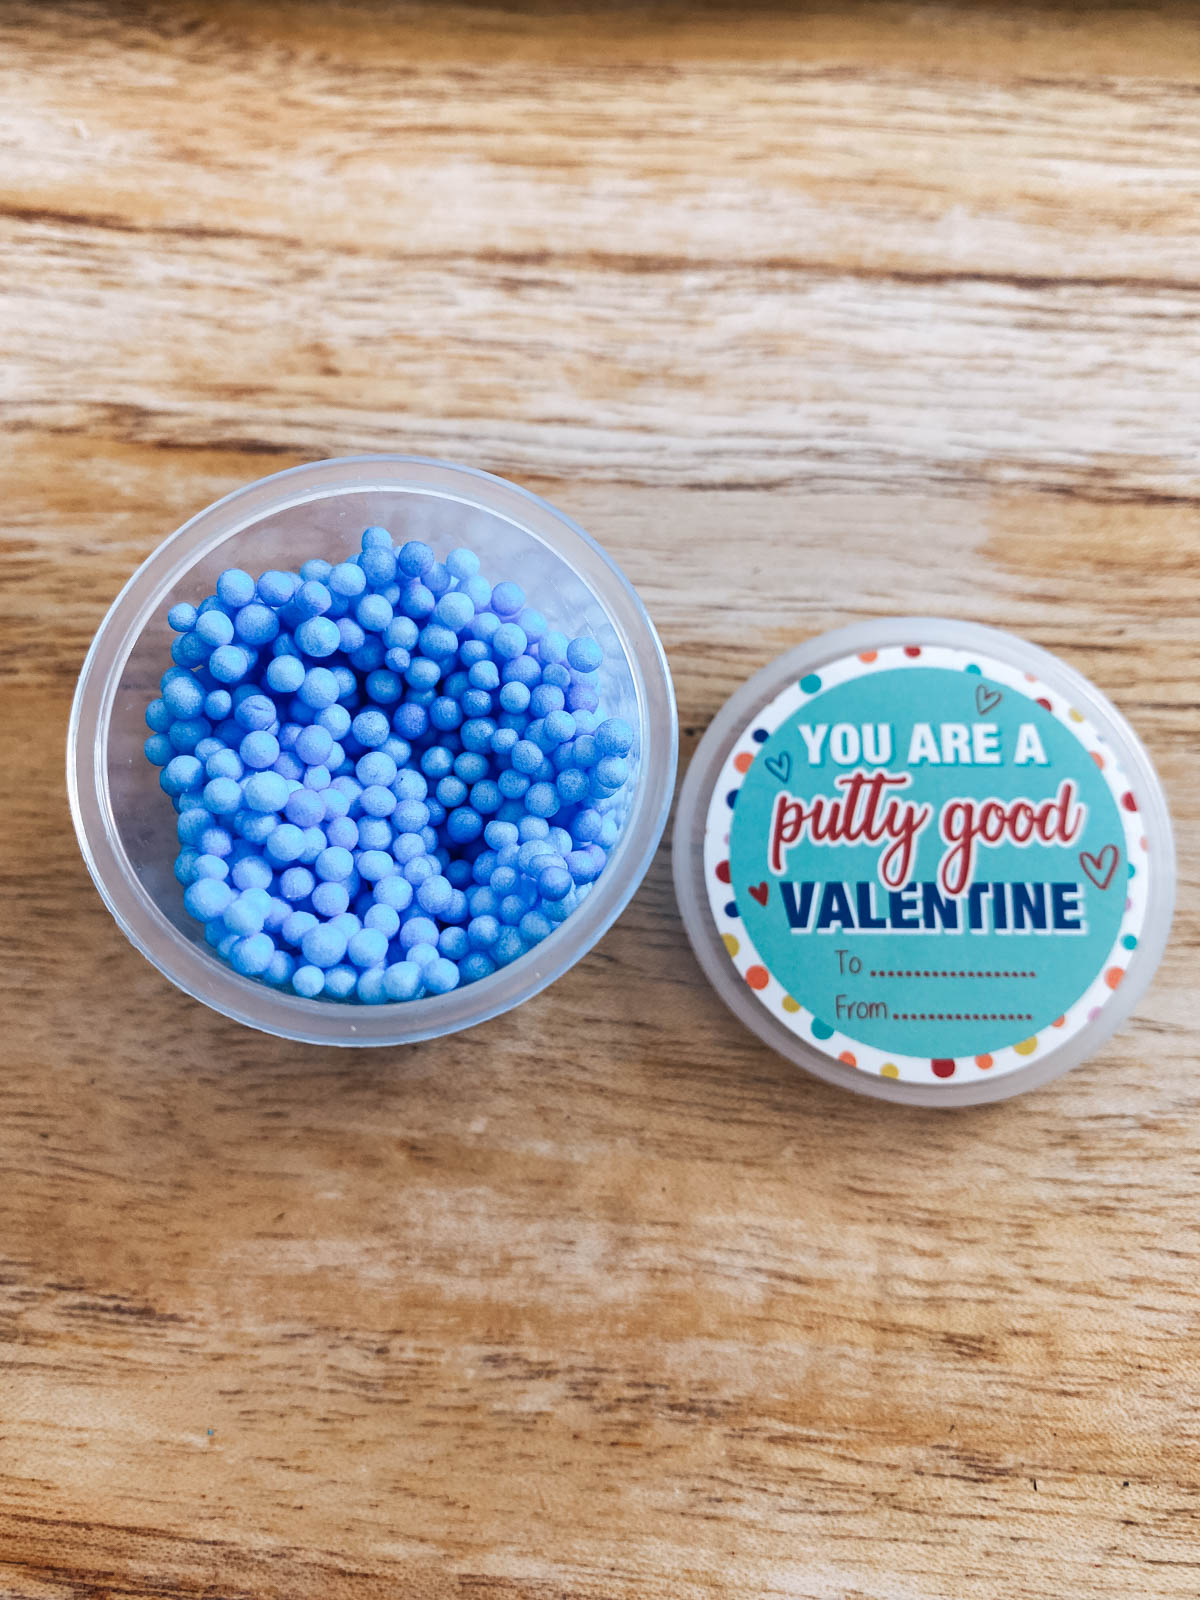 Putty beads in a mini plastic container with witty saying for Valentine's Day.